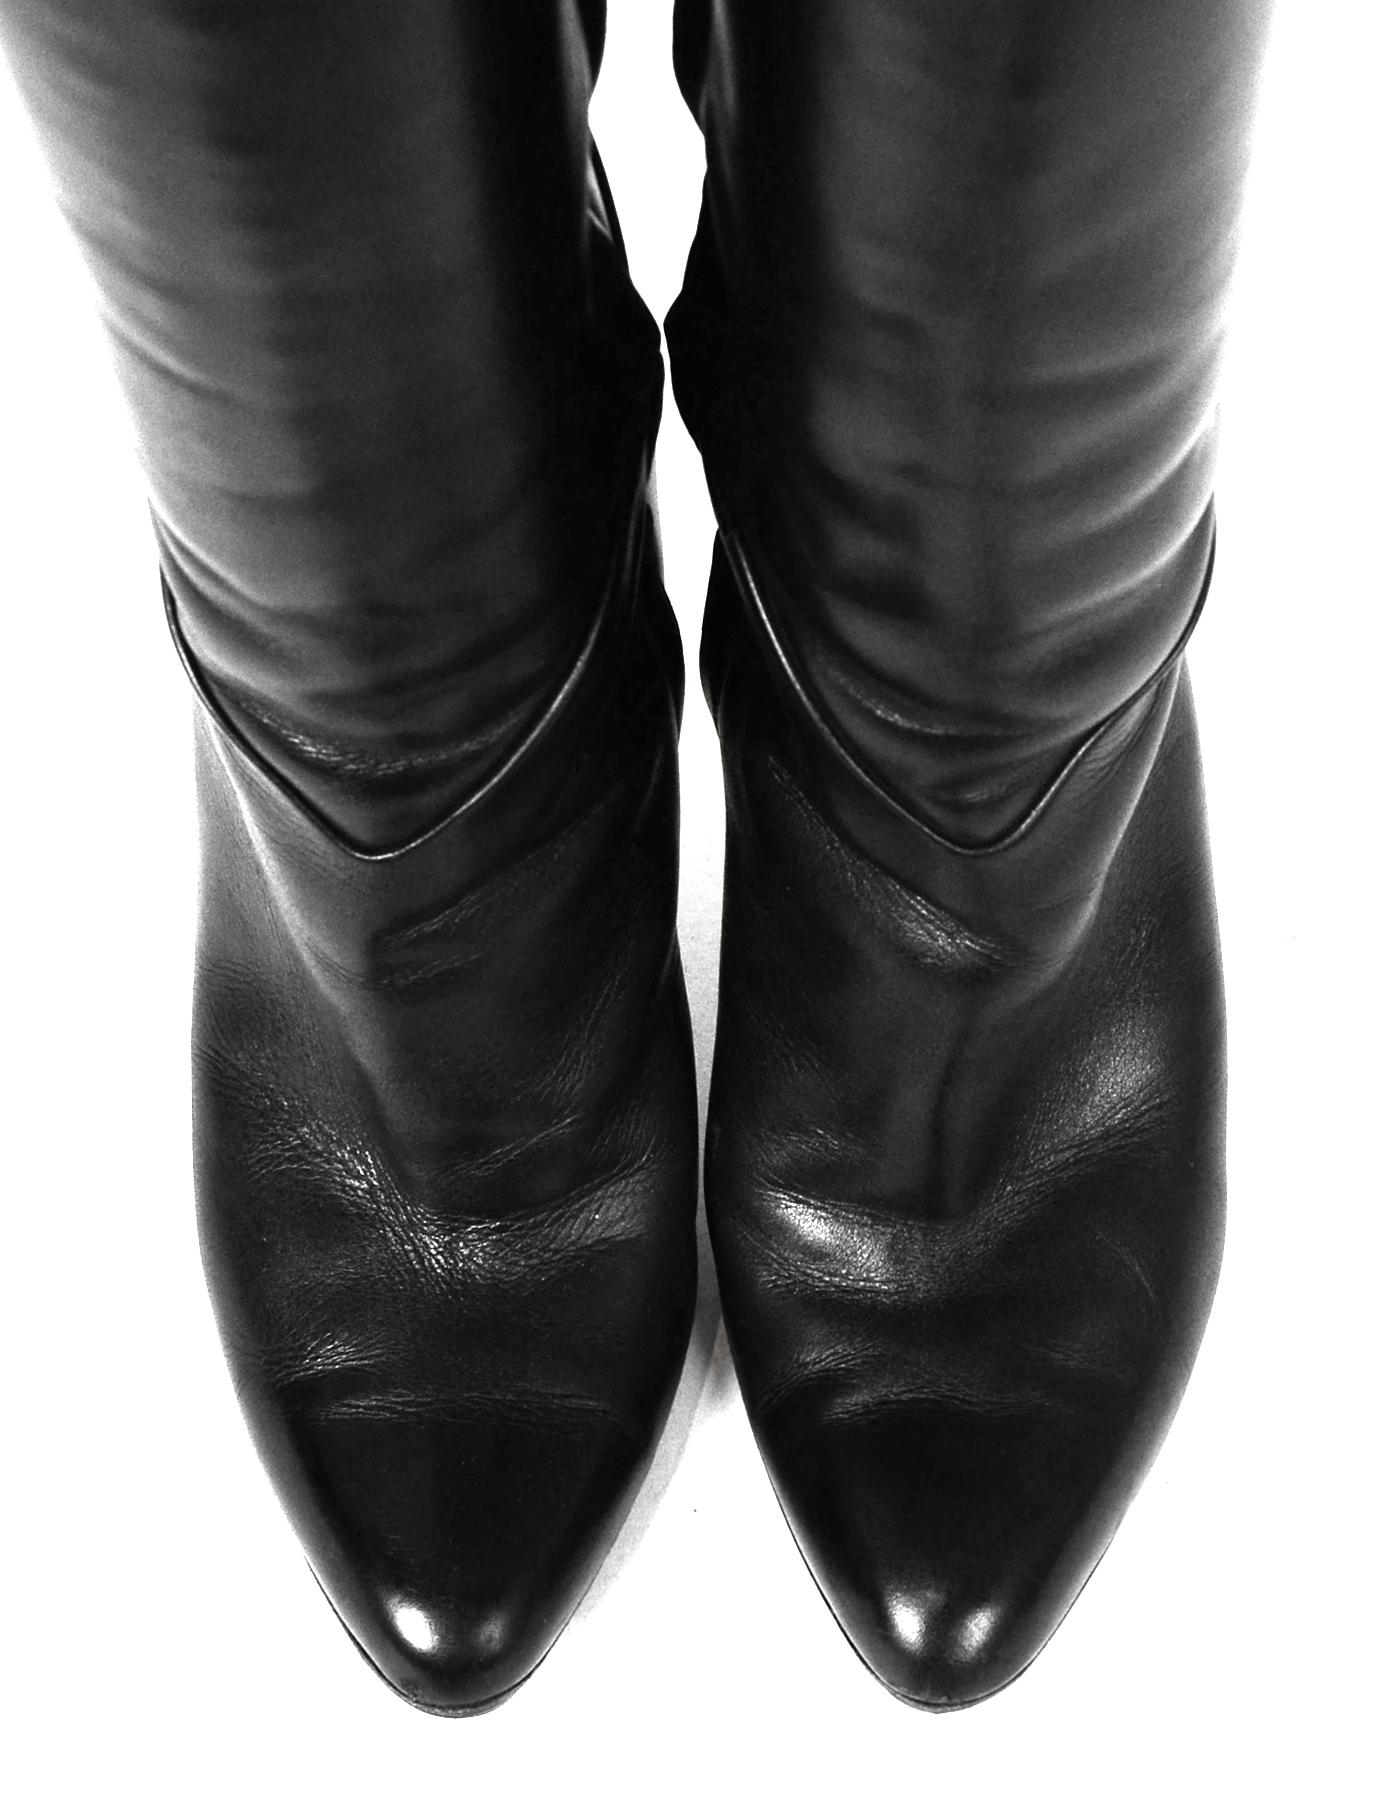 black boots with gold heel